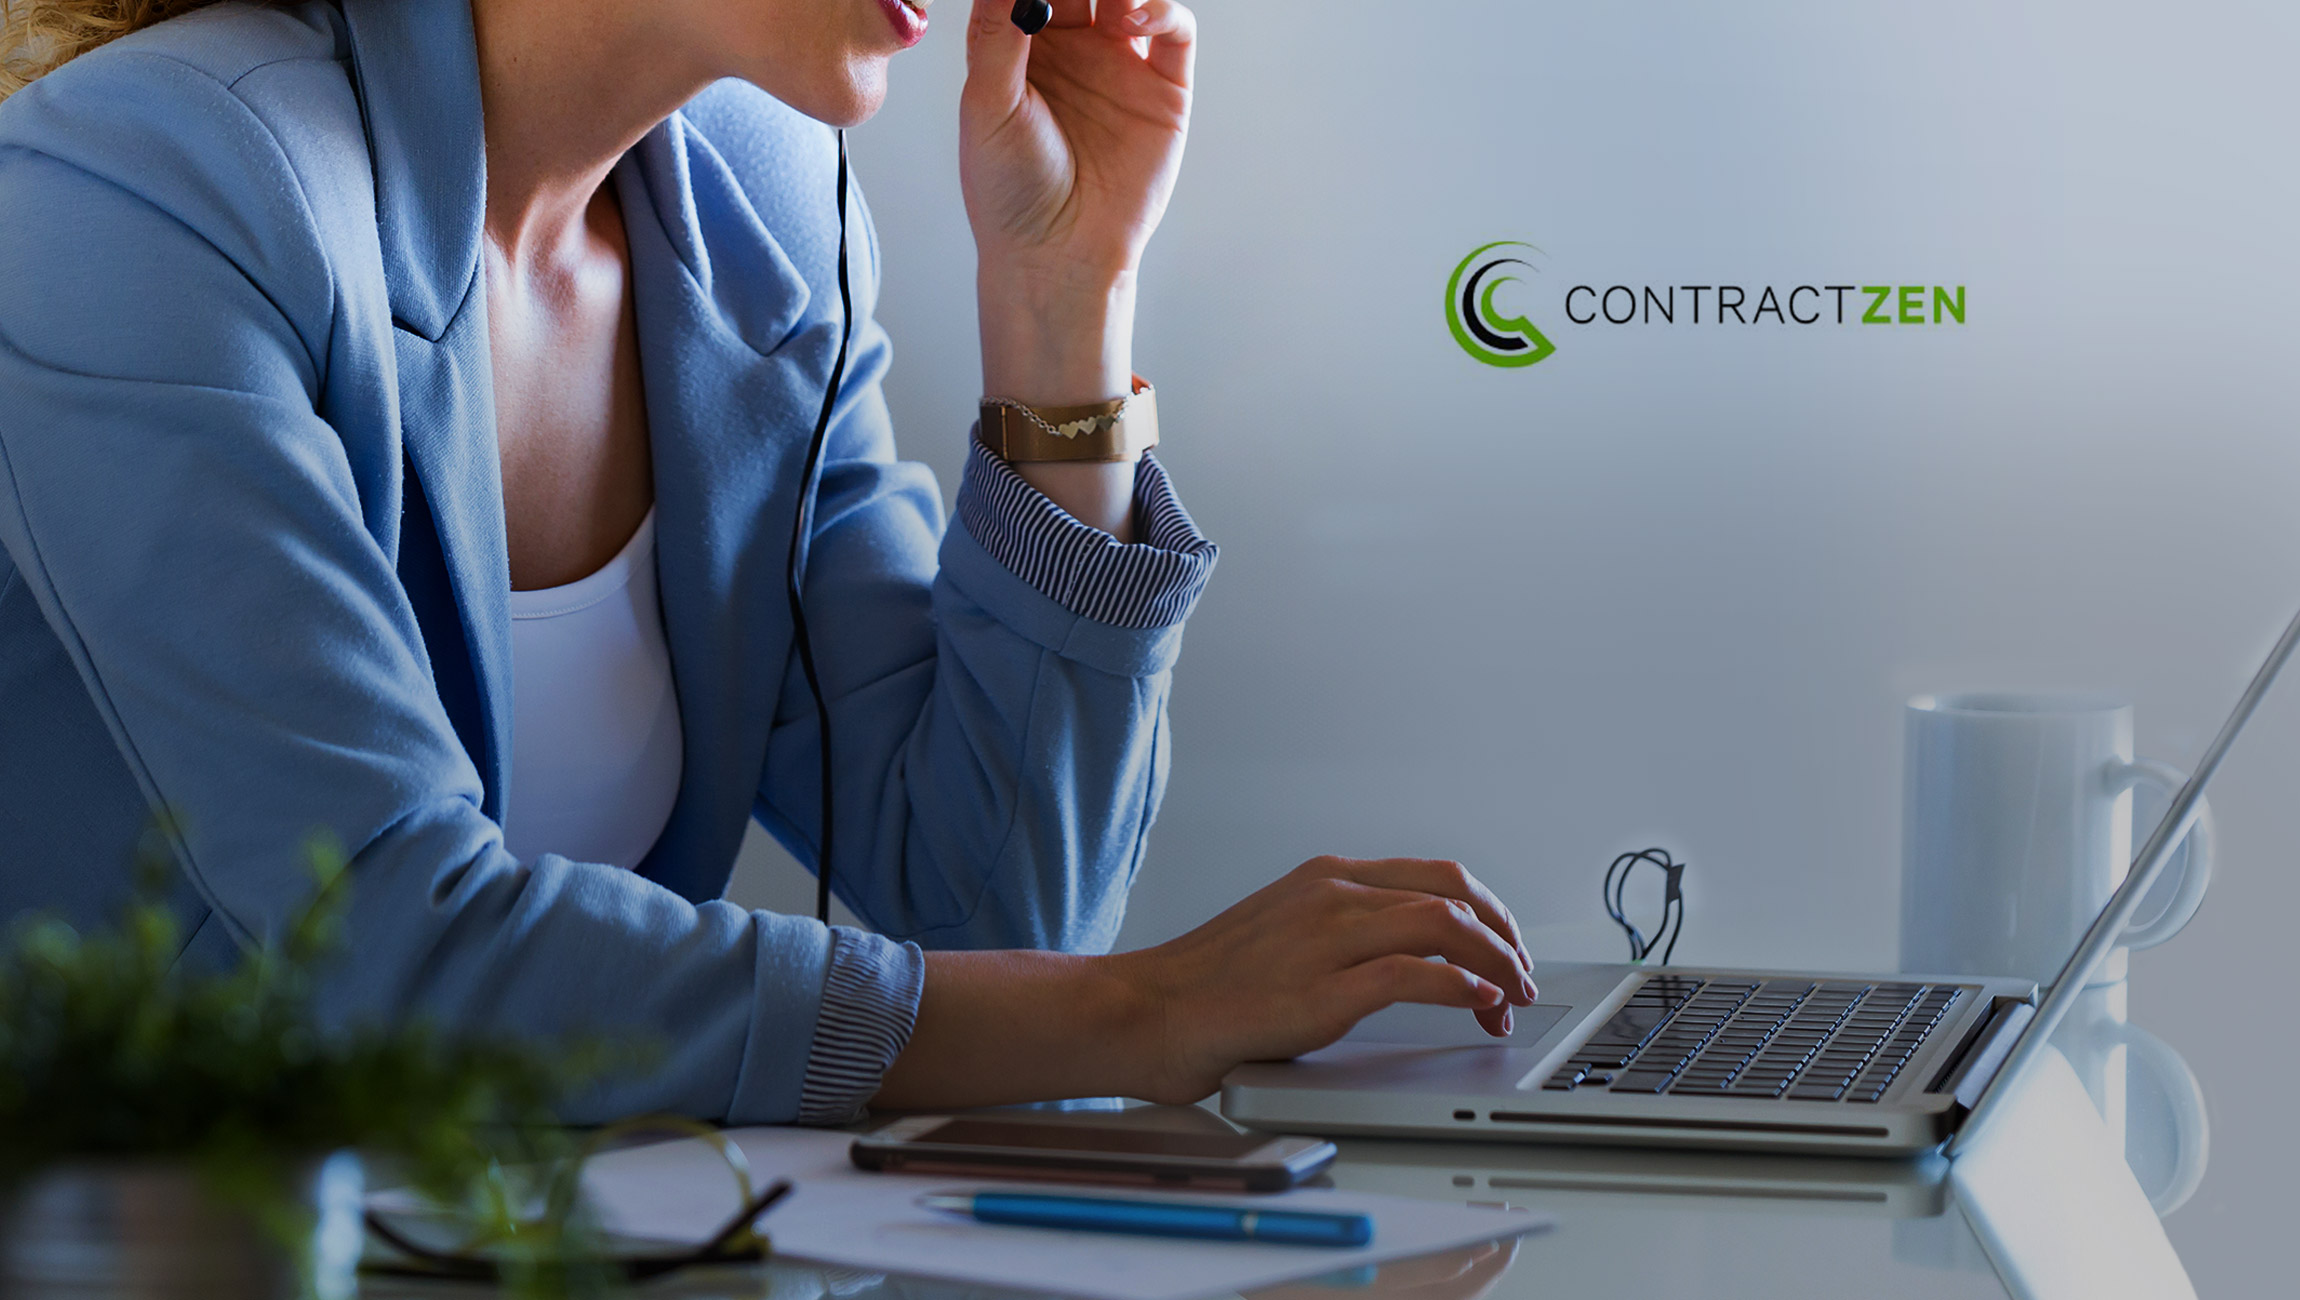 ContractZen Adds Free e-Signature Service to Its SaaS-Based Contract Management Solution